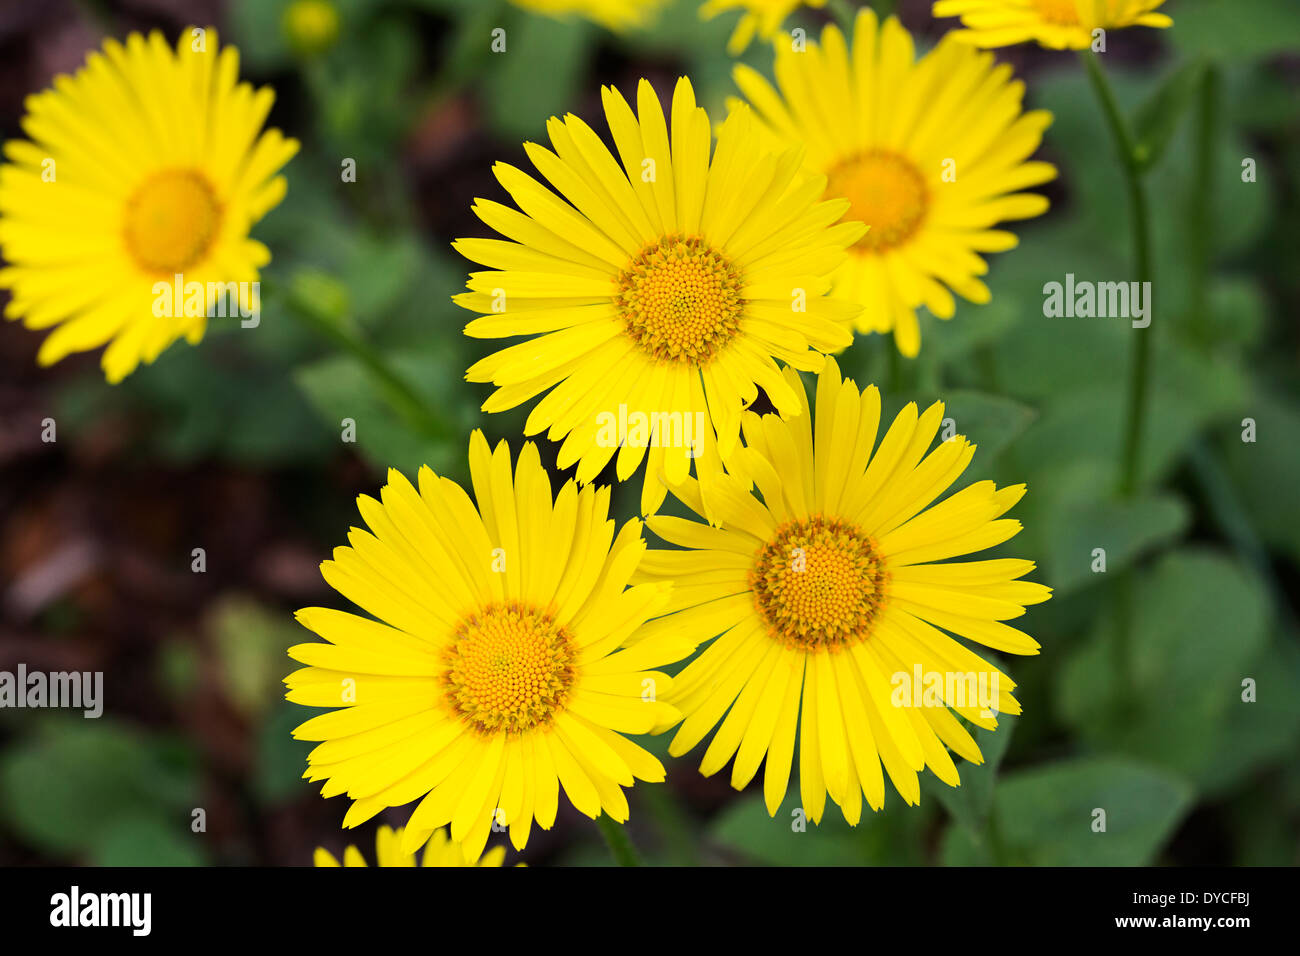 Flowers of Great Leopard's Bane (Doronicum pardalianches) Stock Photo